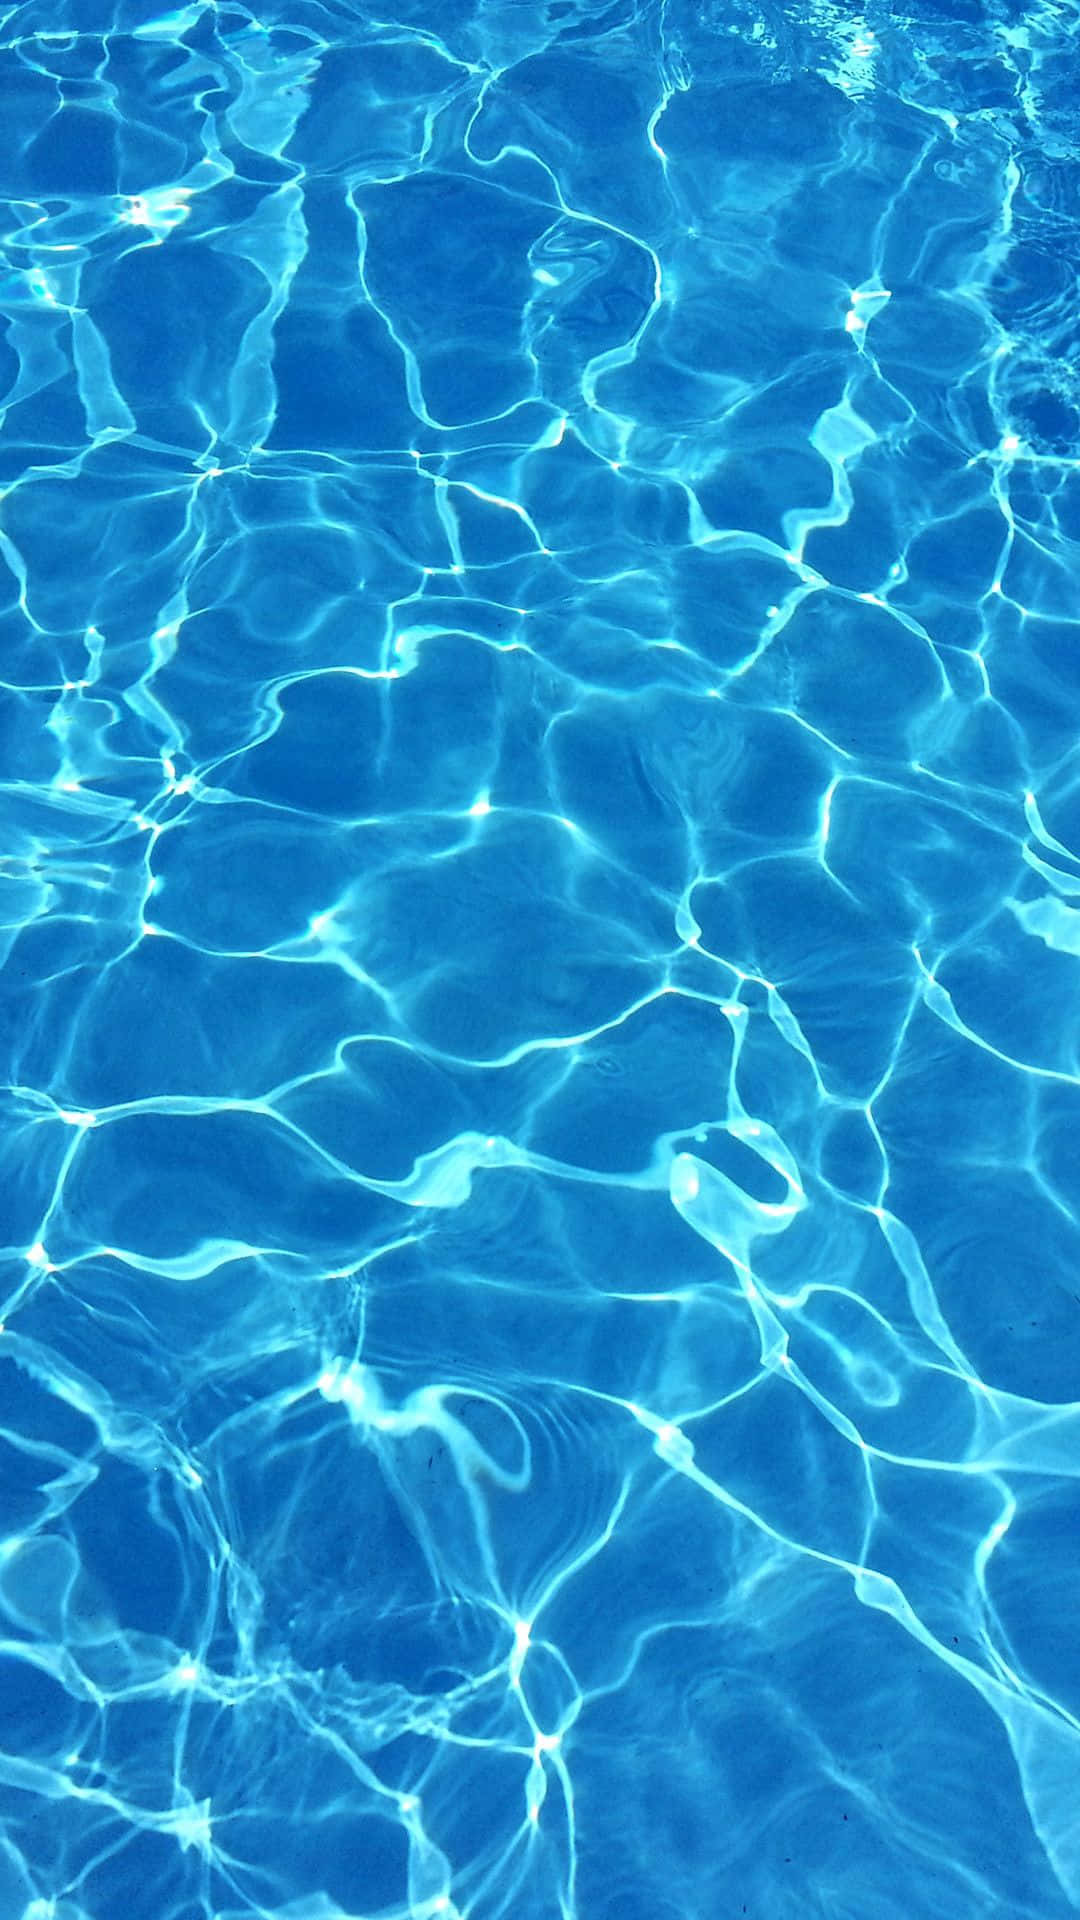 Refresh your day with a relaxing dip in the pool